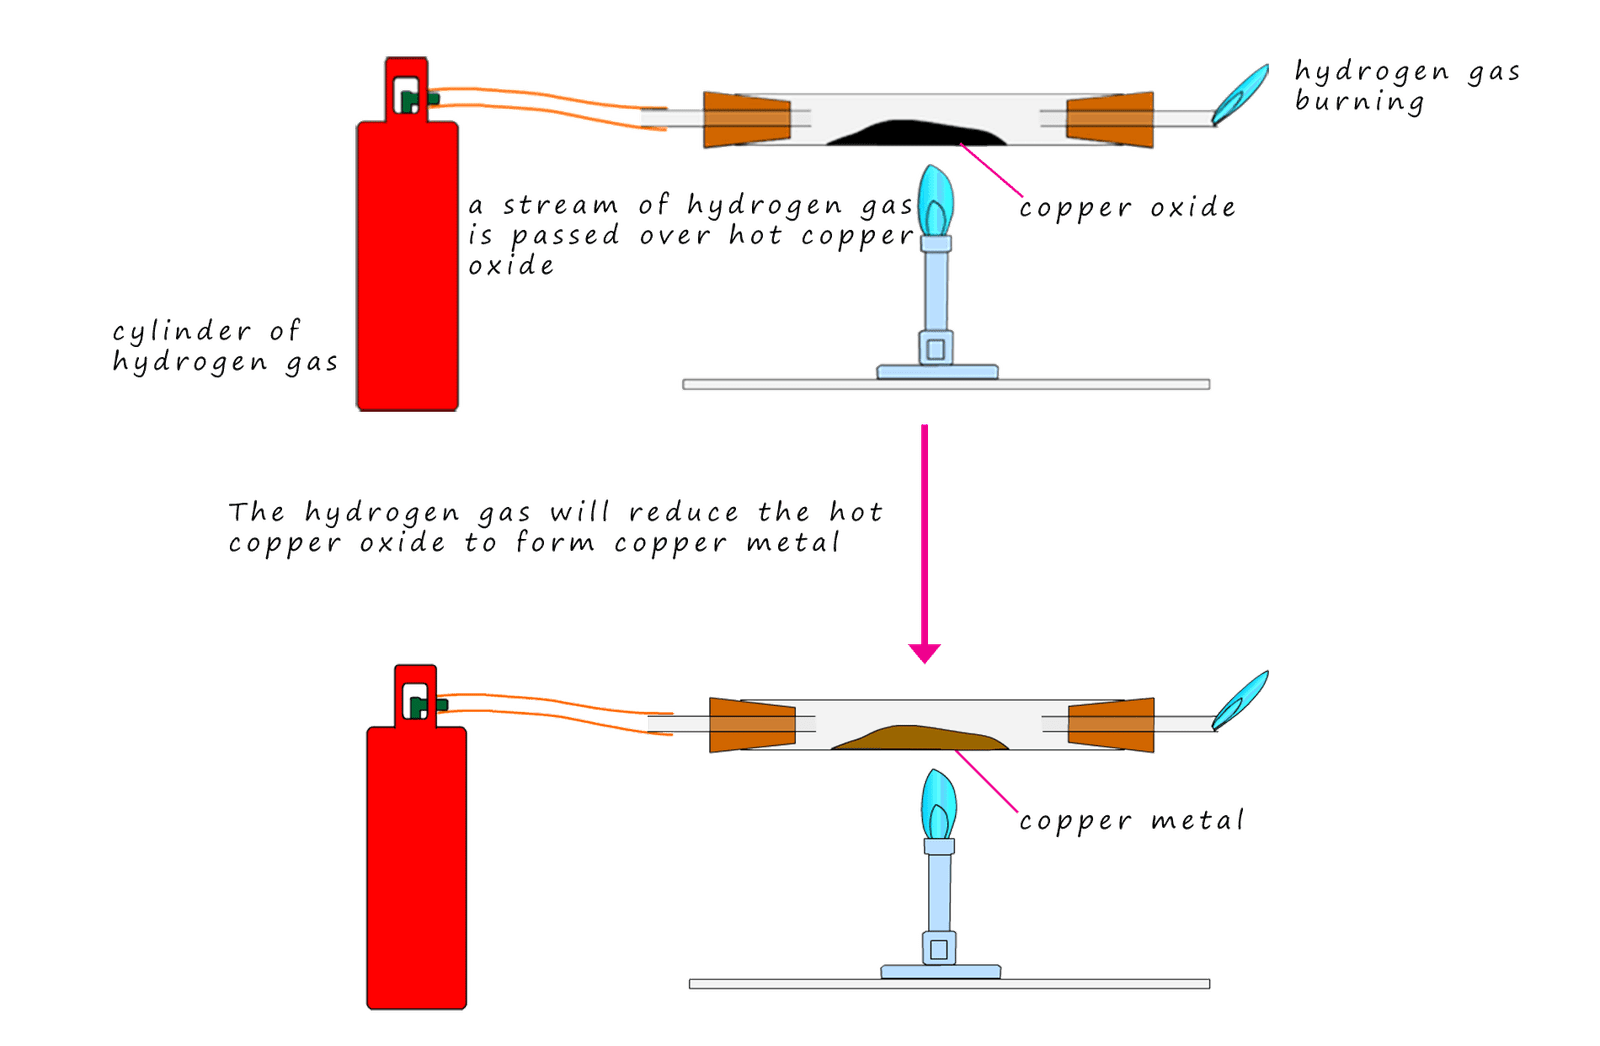 Apaaratus diagram to show the reduction of copper oxide using hydrogen gas.